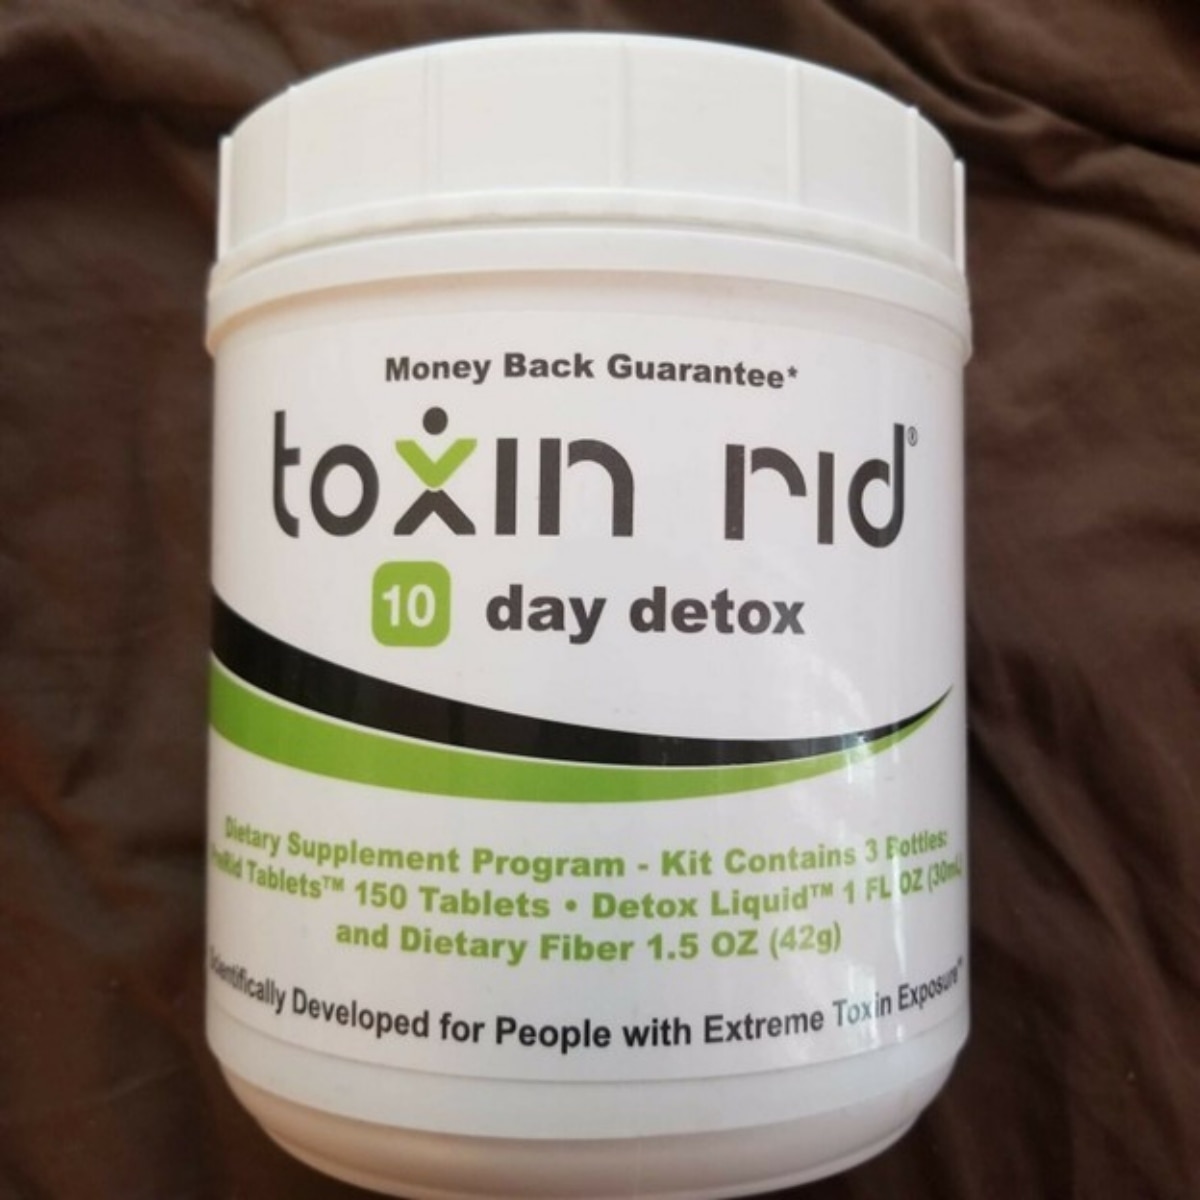 How To Use Toxin Rid 10 Day Detox Full Instructions Included